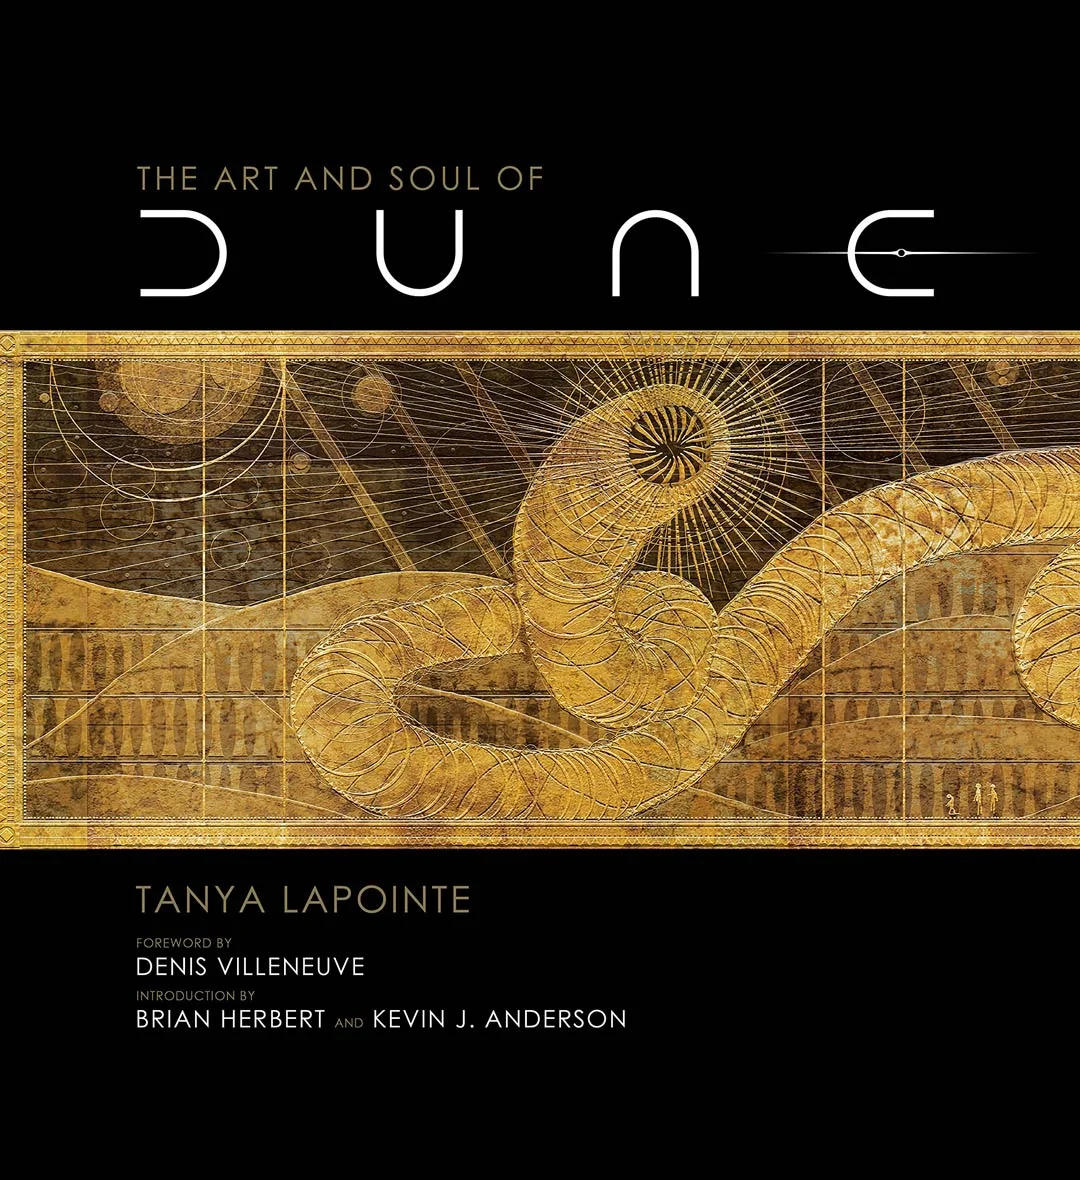 Jacket cover for the 'The Art and Soul of Dune' book, written by Tanya Lapointe.